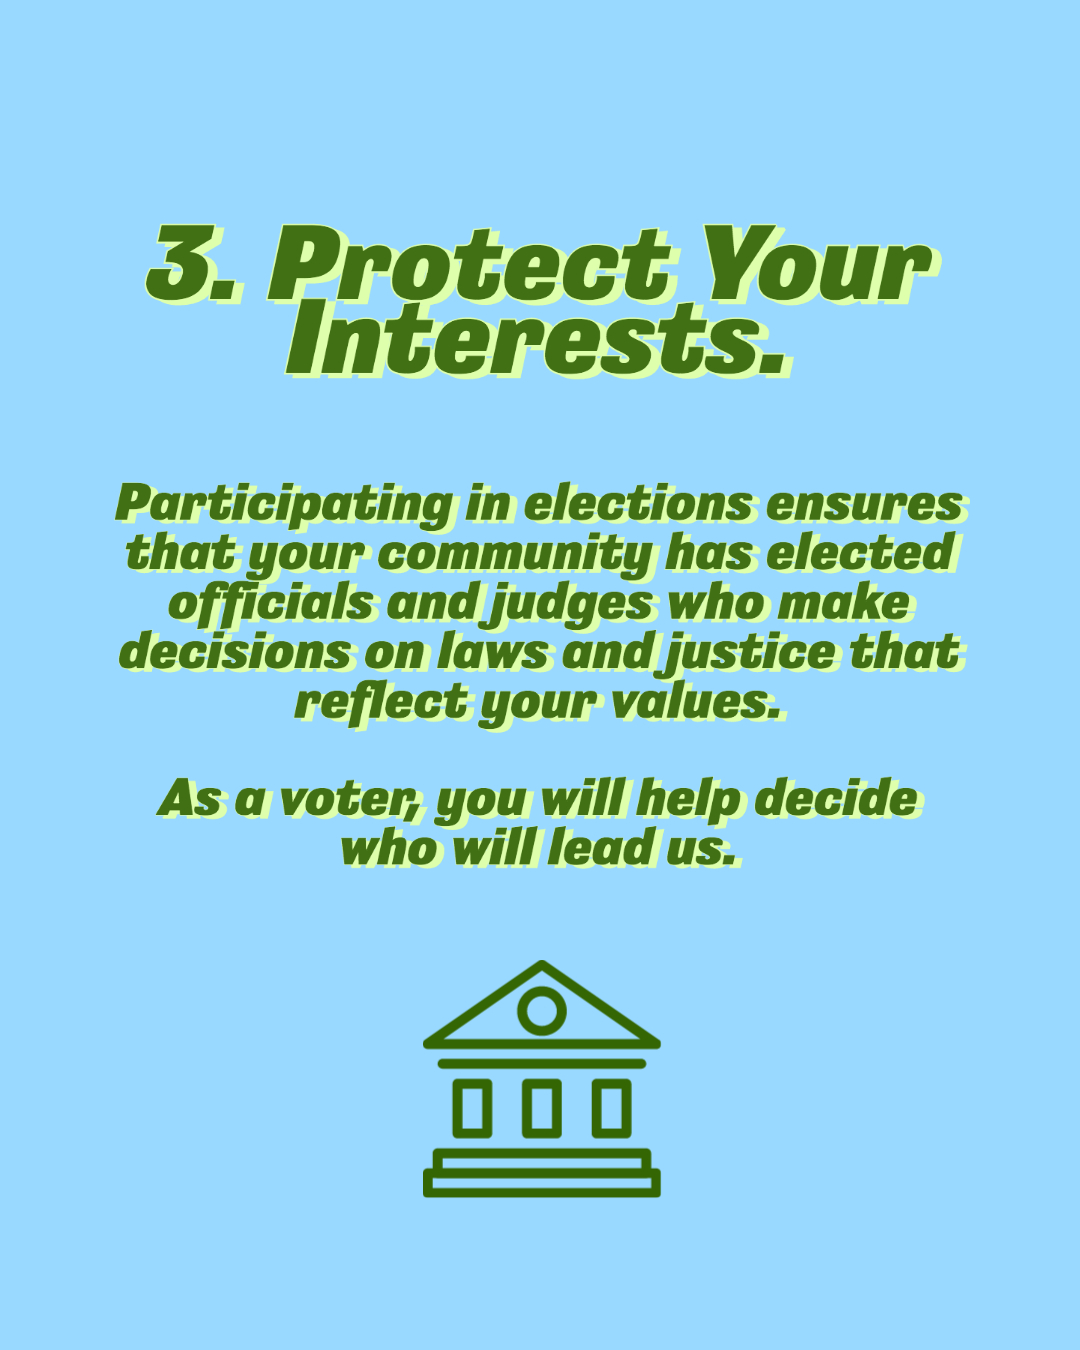 Protect your interests. Participating in elections ensures that your community has elected officials and judges who make decisions on laws and justice that reflects you values. As a voter, you will help decide who will lead us